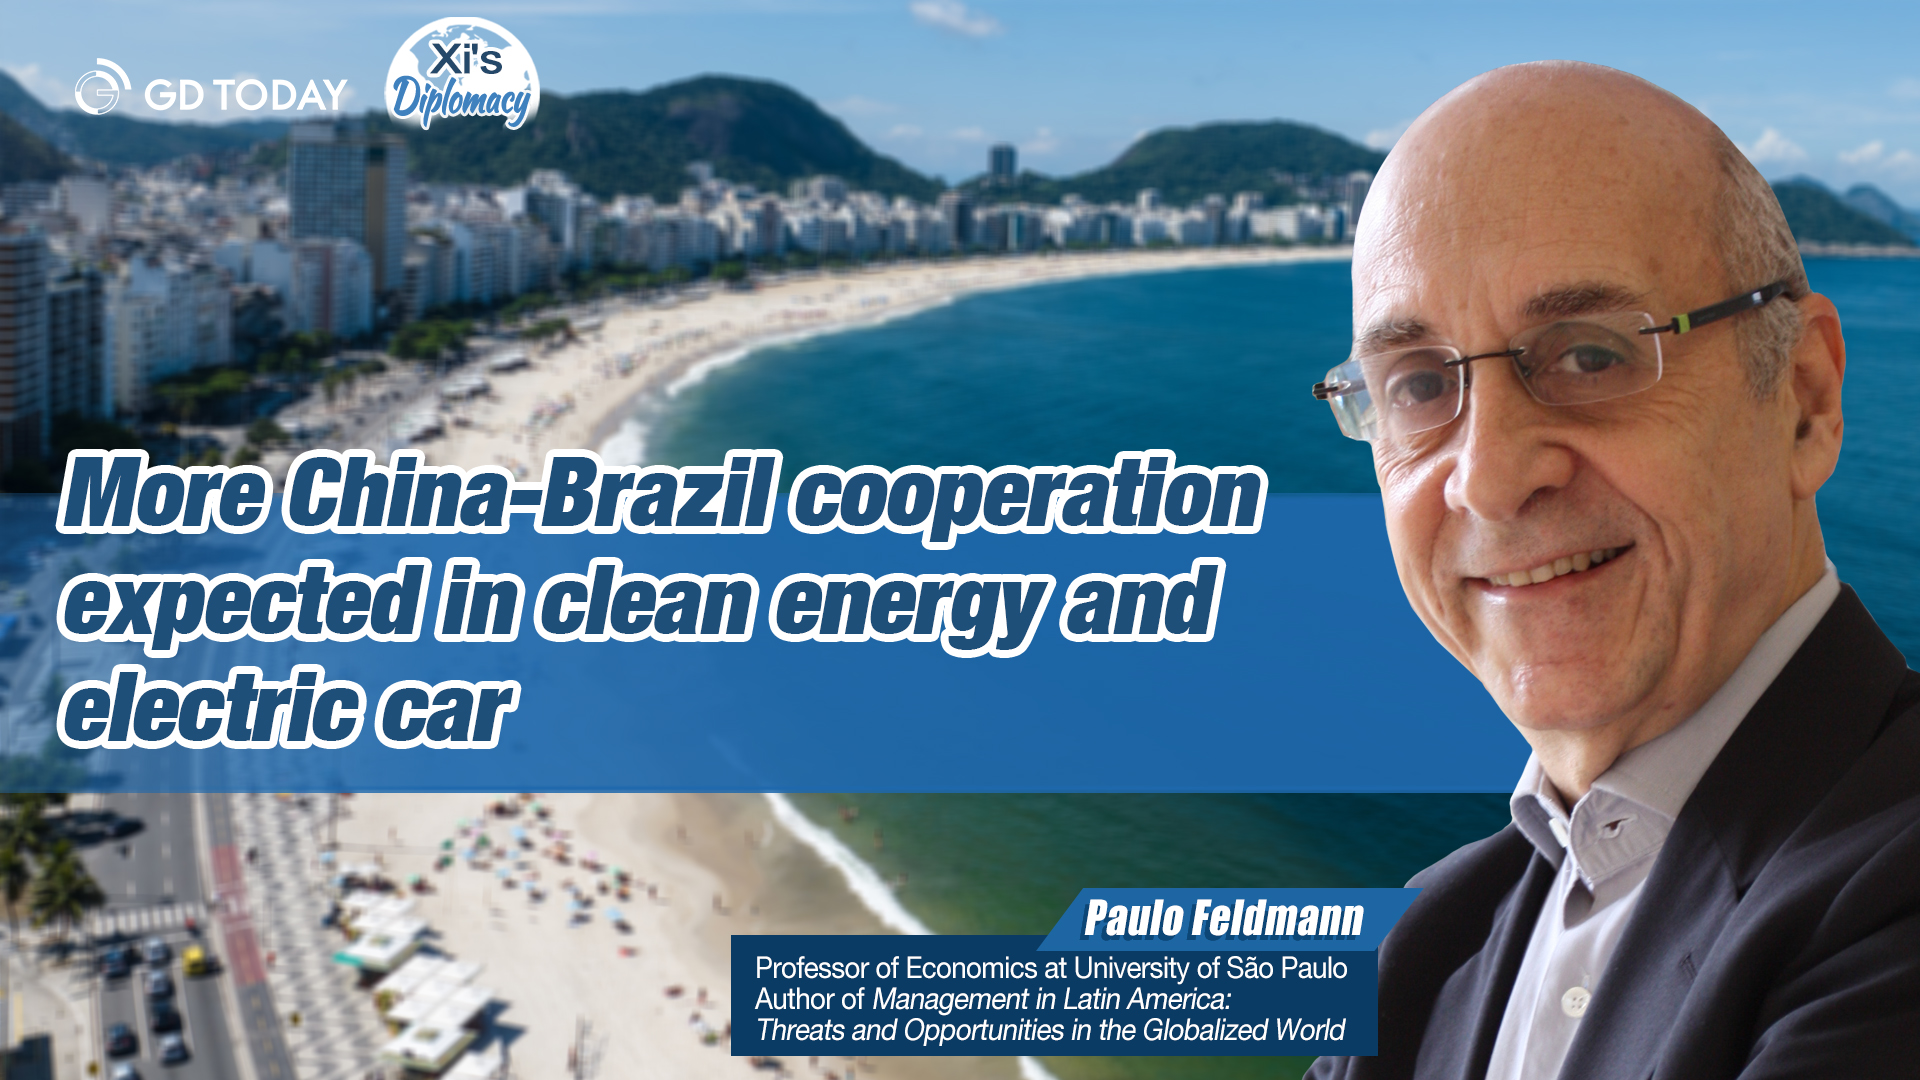 More China-Brazil cooperation expected in clean energy and electric cars: member of the transition team of Brazil's new government